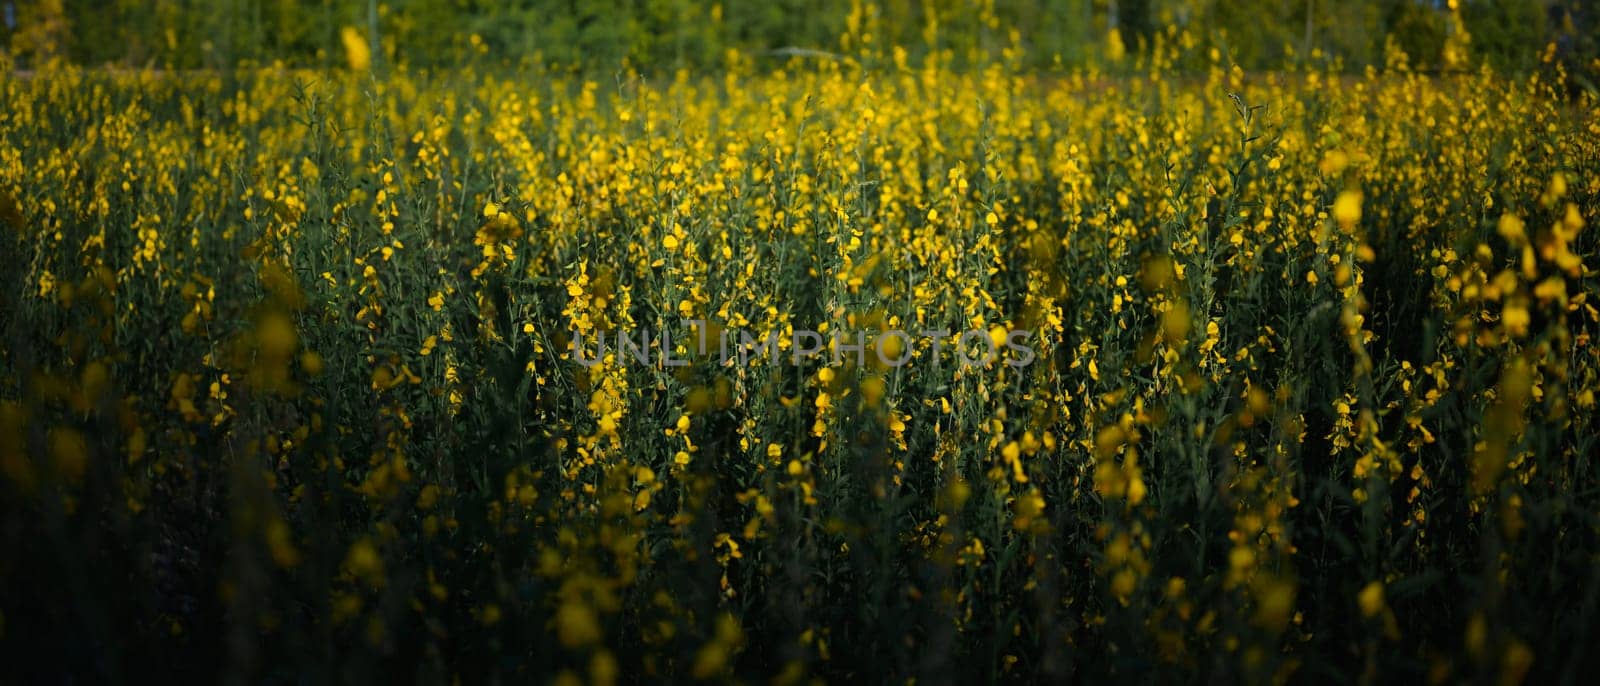 Yellow flowers of Crotalaria juncea (sunn hemp) blooming in fields for soil improvement at sunset.